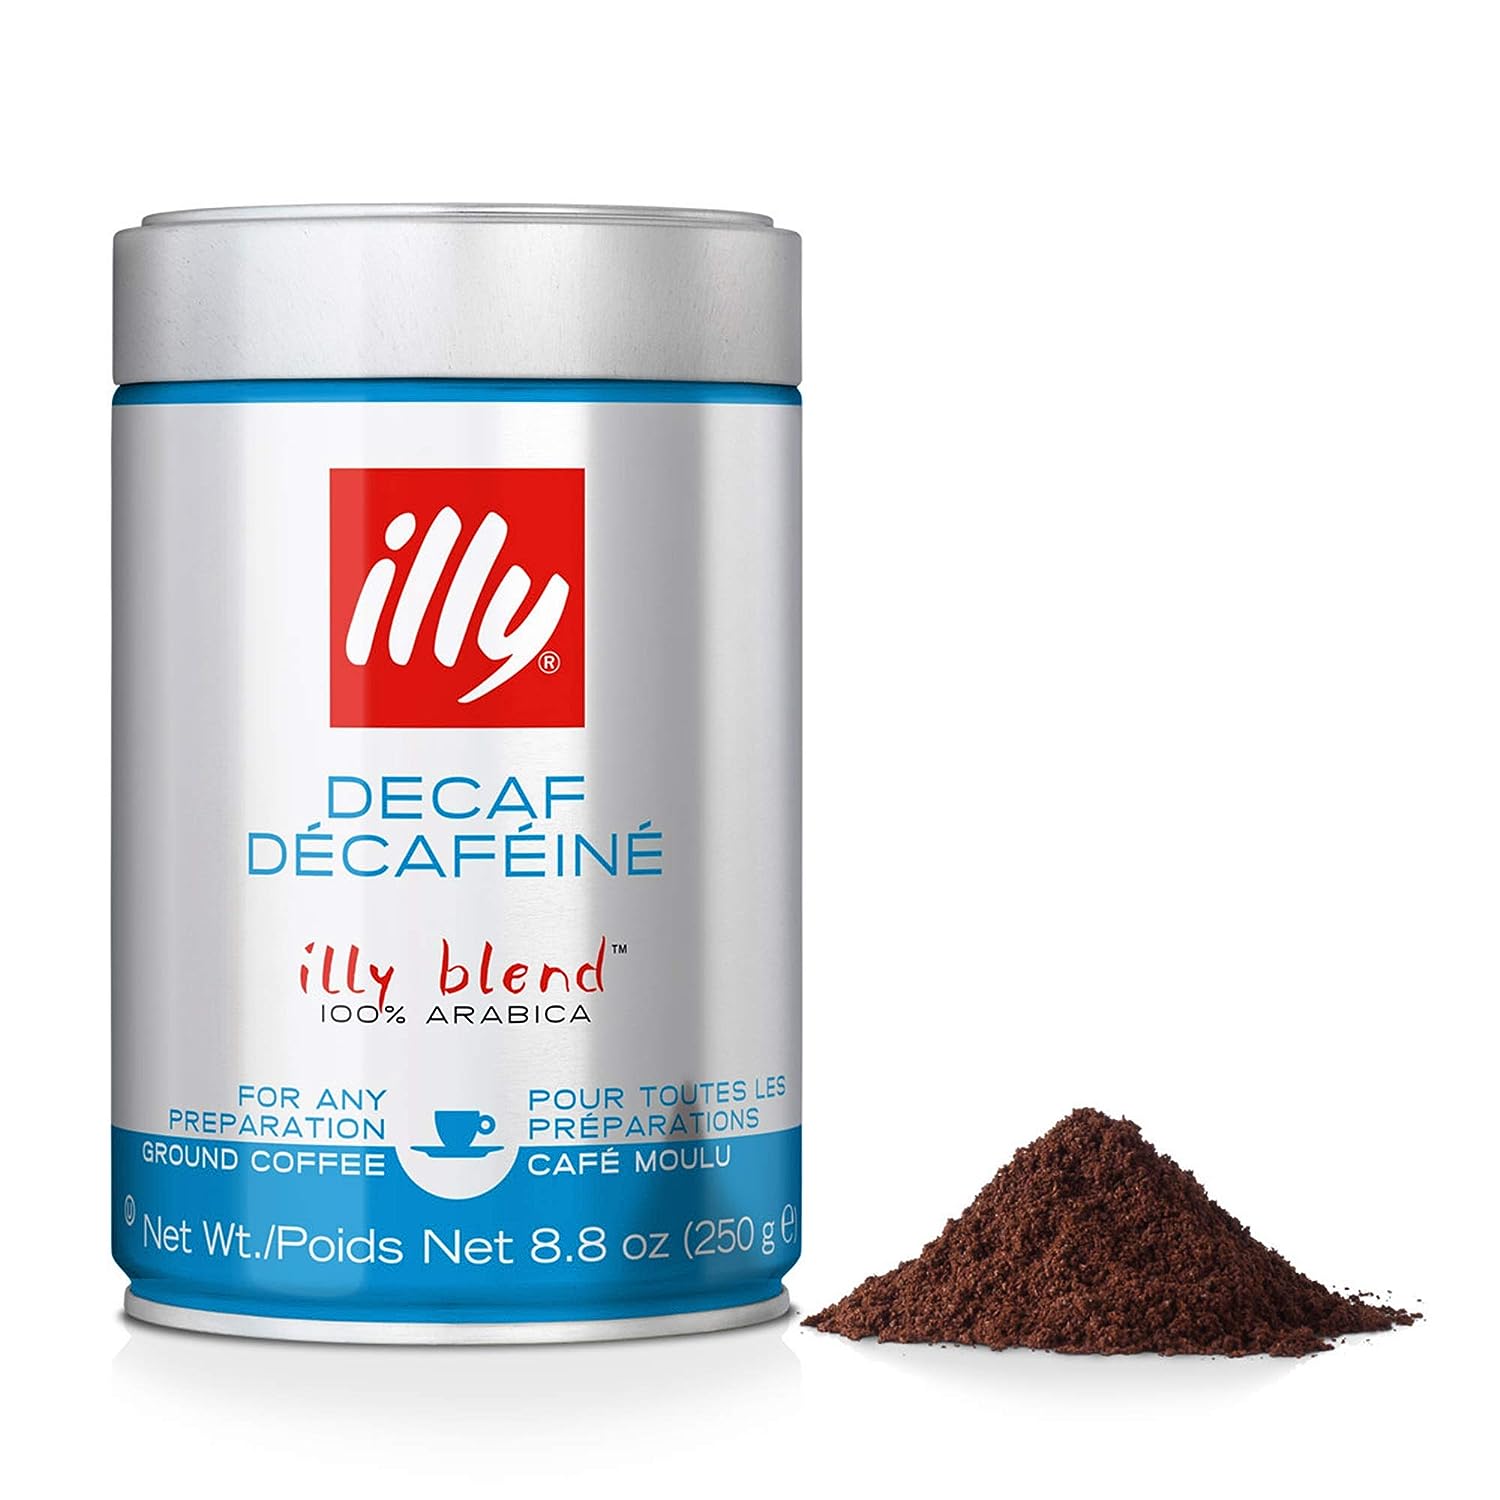 illy Decaffeinated Ground Espresso Coffee, Classic Medium Roast with Notes of Toasted Bread, 100% Arabica Coffee, No Preservatives, Can (Pack of 2)